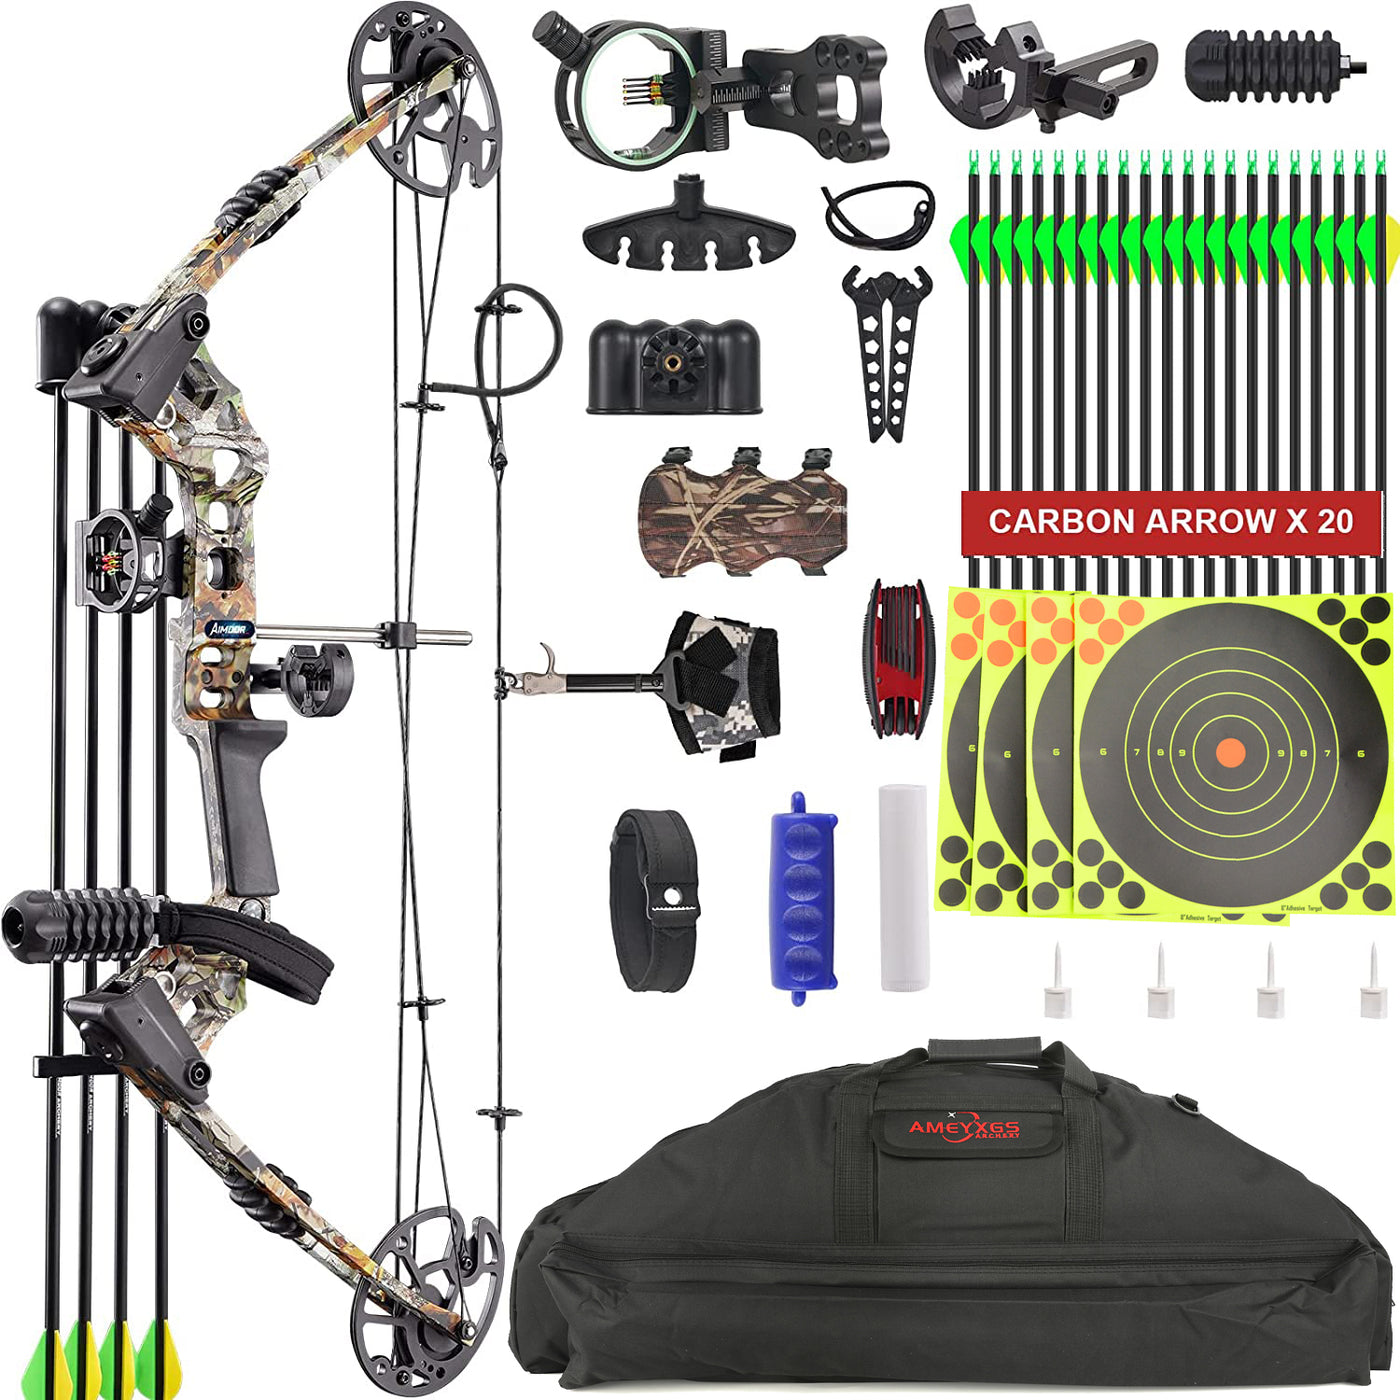 Junxing M120 Compound Bow Kit for Beginner with All Accessories